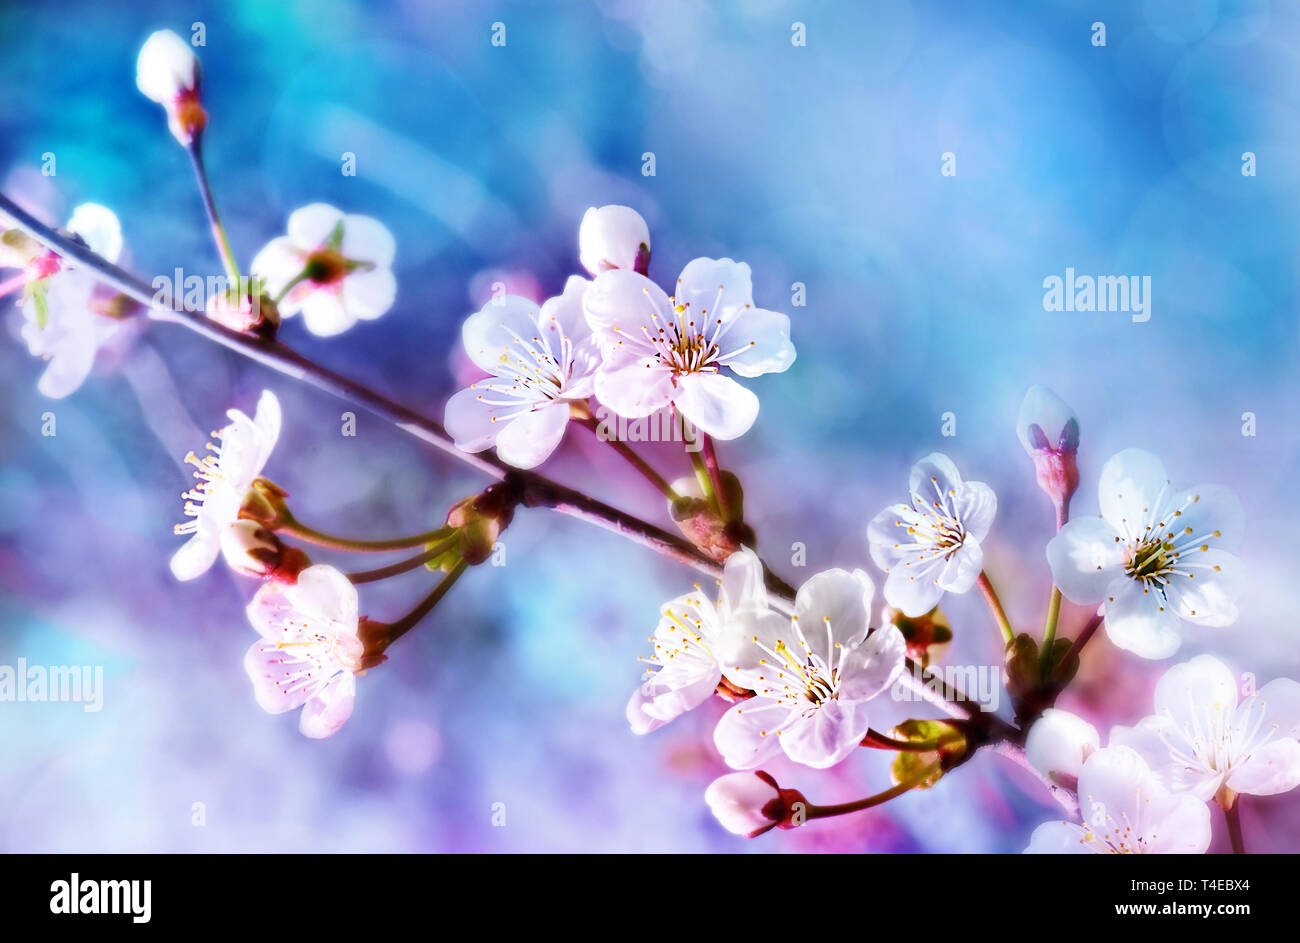 Beautiful branch of flowering apple tree in spring on light blue and pink background macro. Stock Photo